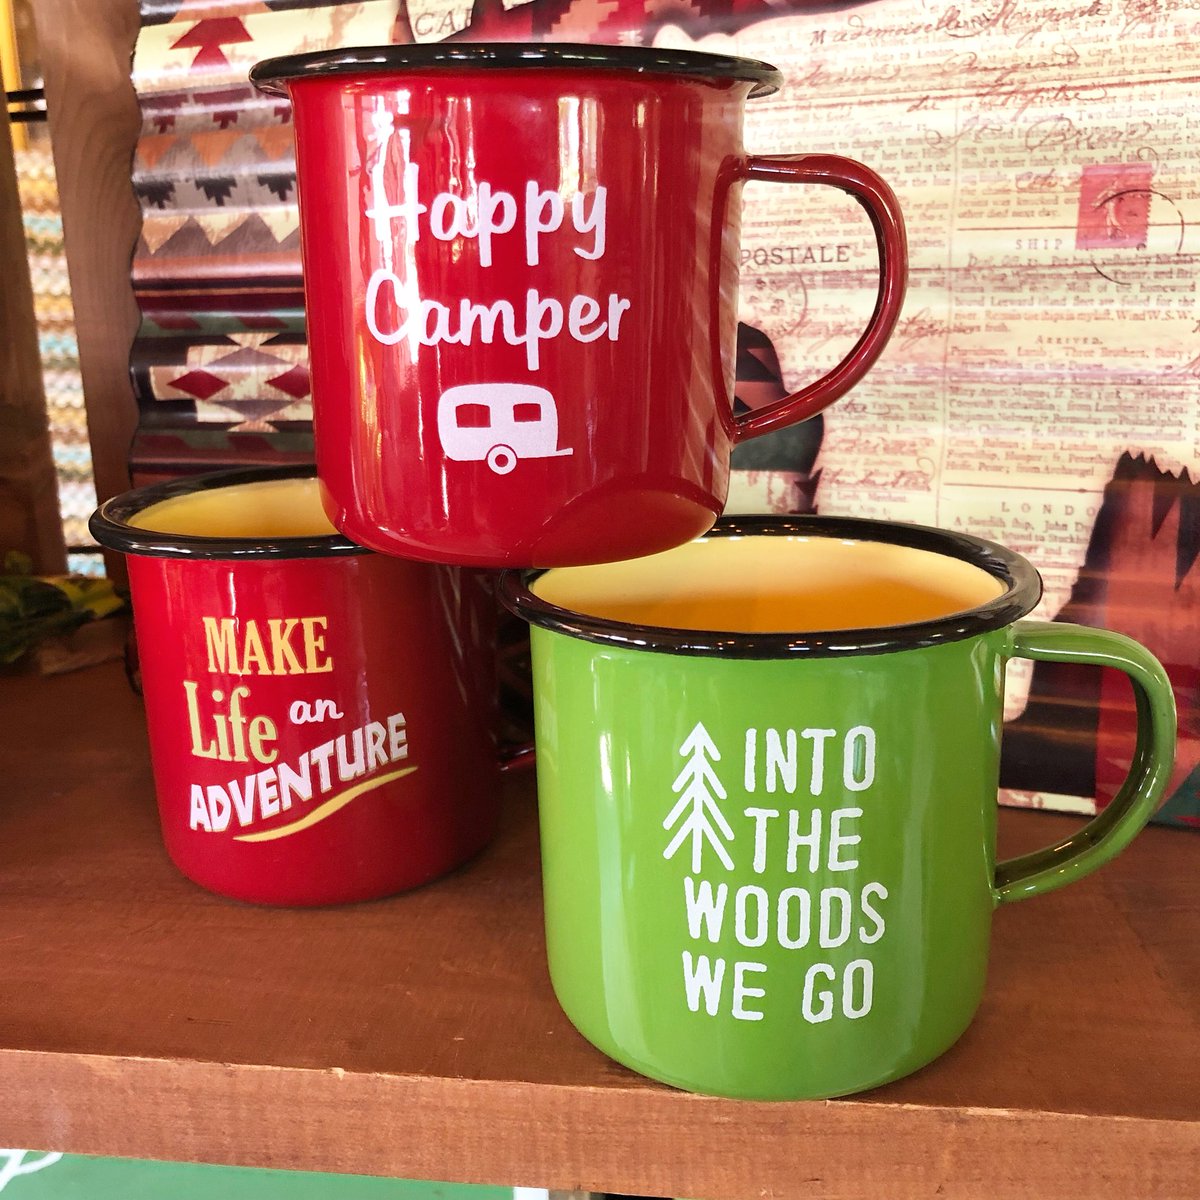 Weekend plans!?!?
How about some camping?
#anniestradingpost #shopsmall #shoproseau #shoplocal #campingmugs #happycamper #intothewoodswego